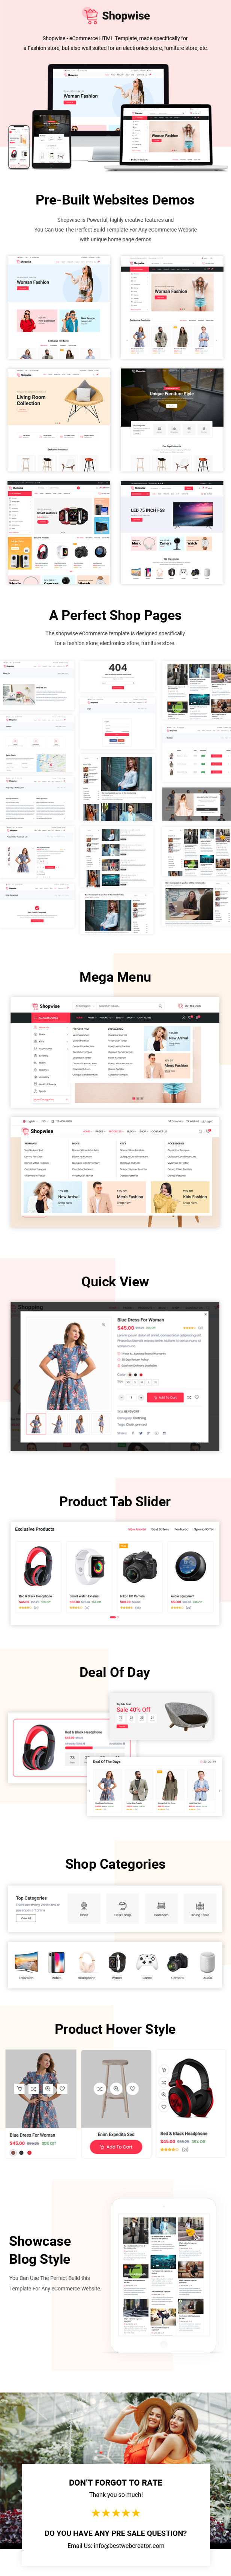 Shopwise-eCommerce-Bootstrap4-html5-template